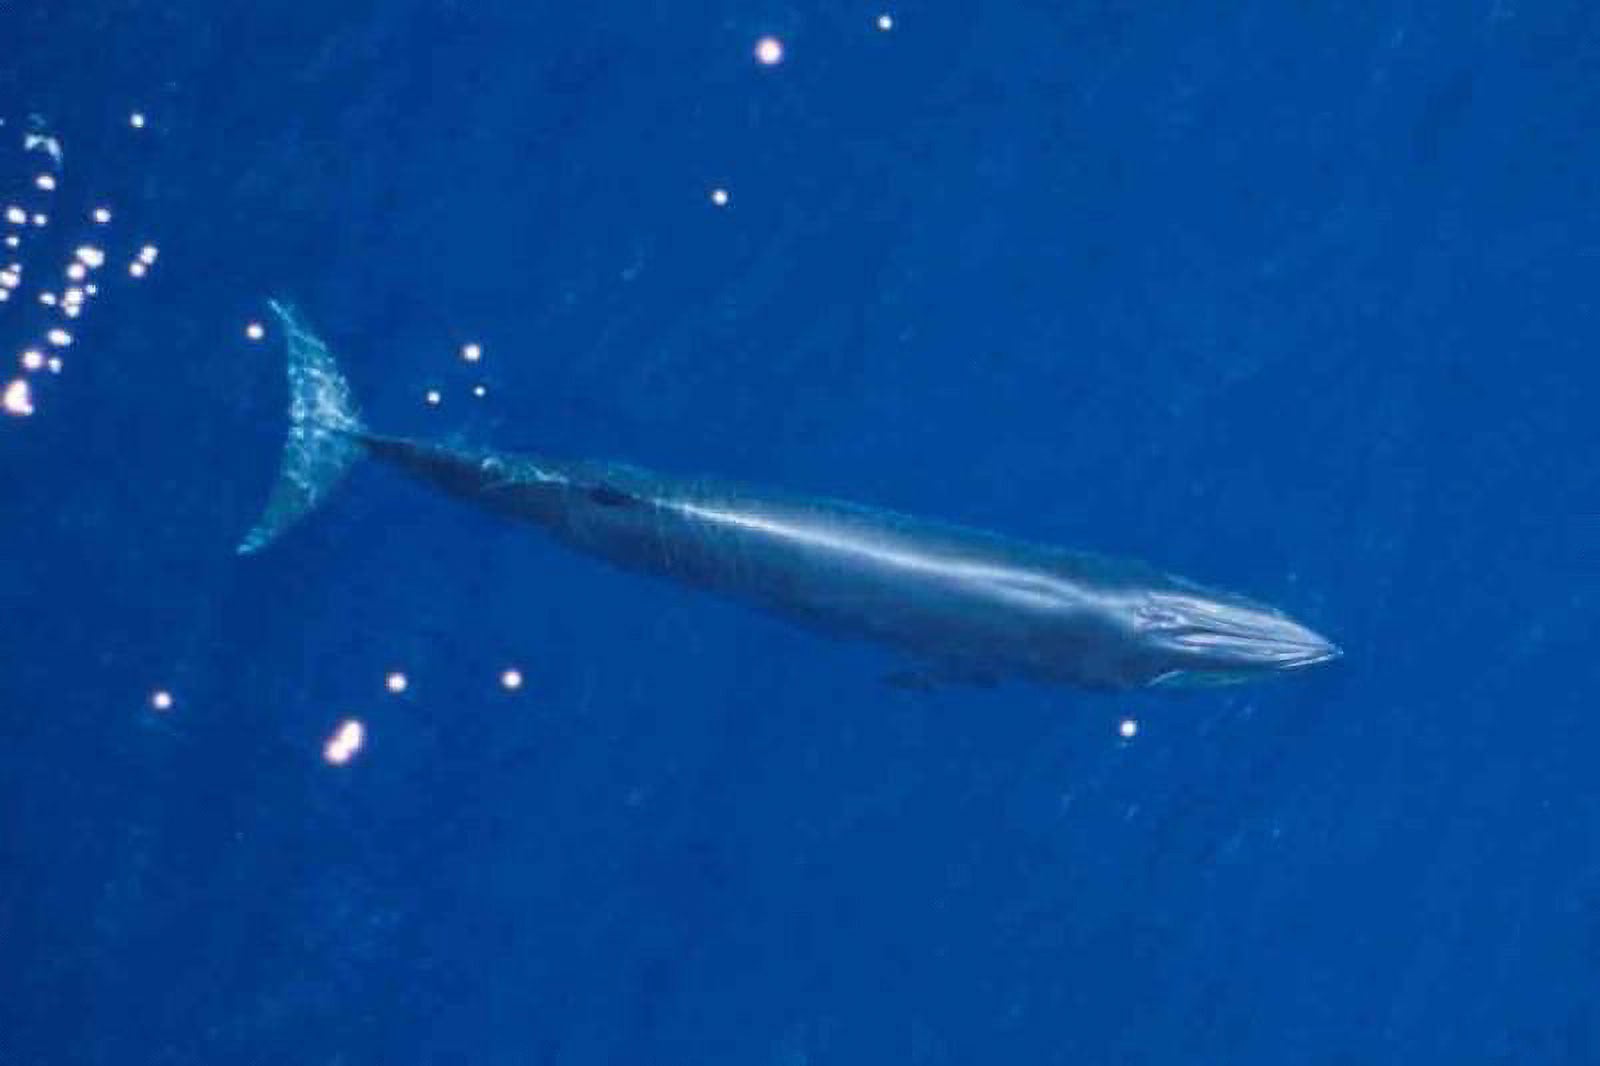 An aerial photo of the Gulf of Mexico whale, swimming under the surface in bright blue waters.